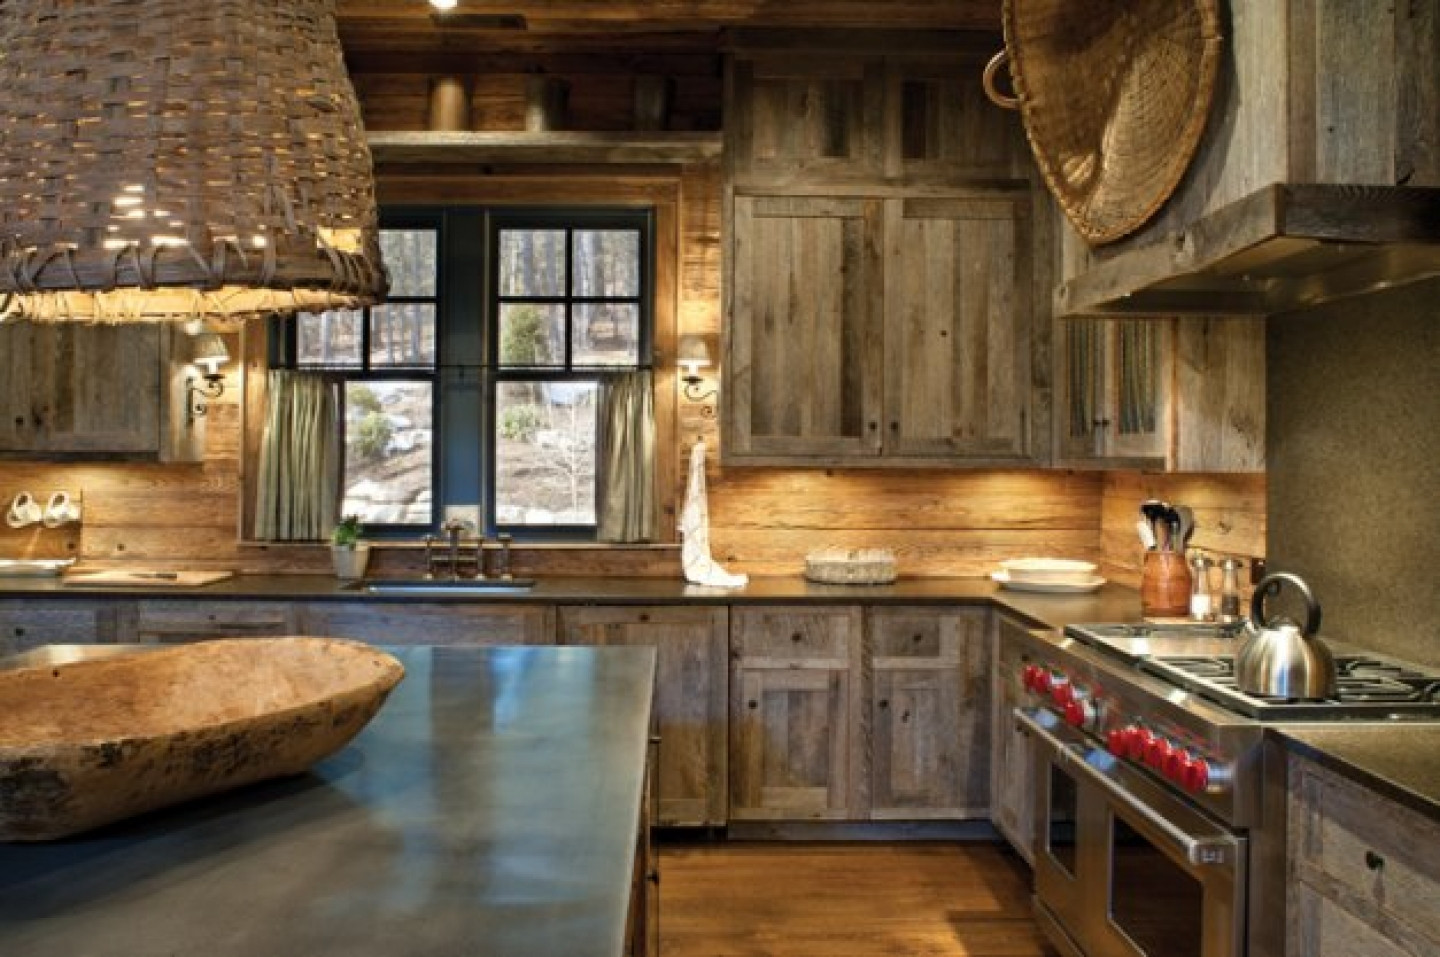 Rustic Style Kitchen
 40 Rustic Interior Design For Your Home – The WoW Style